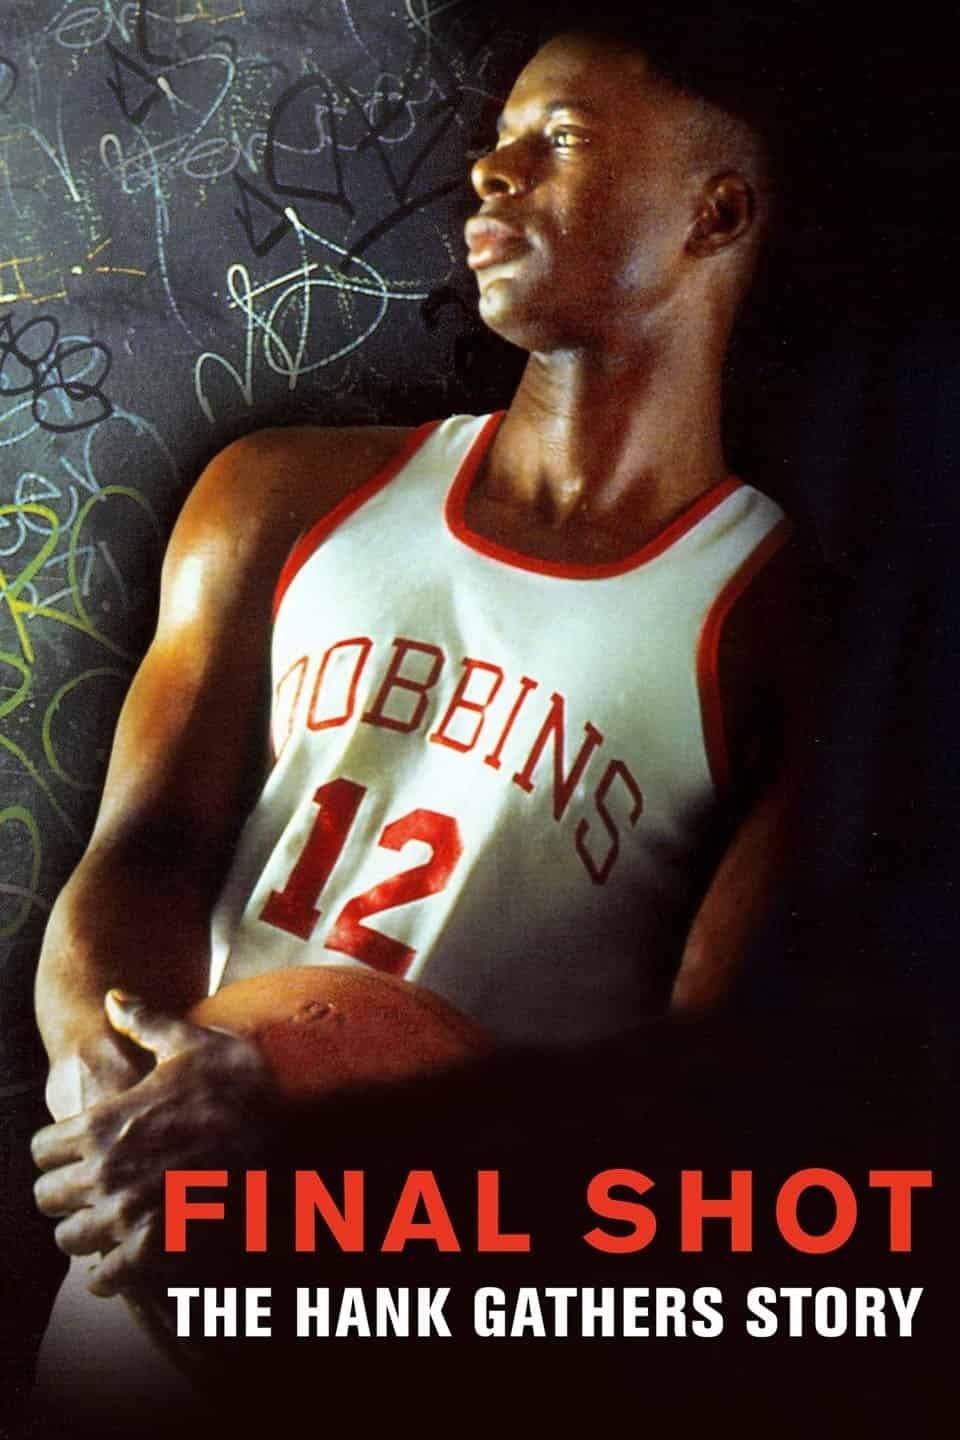 Final Shot - The Hank Gathers Story (1992) Movie Poster